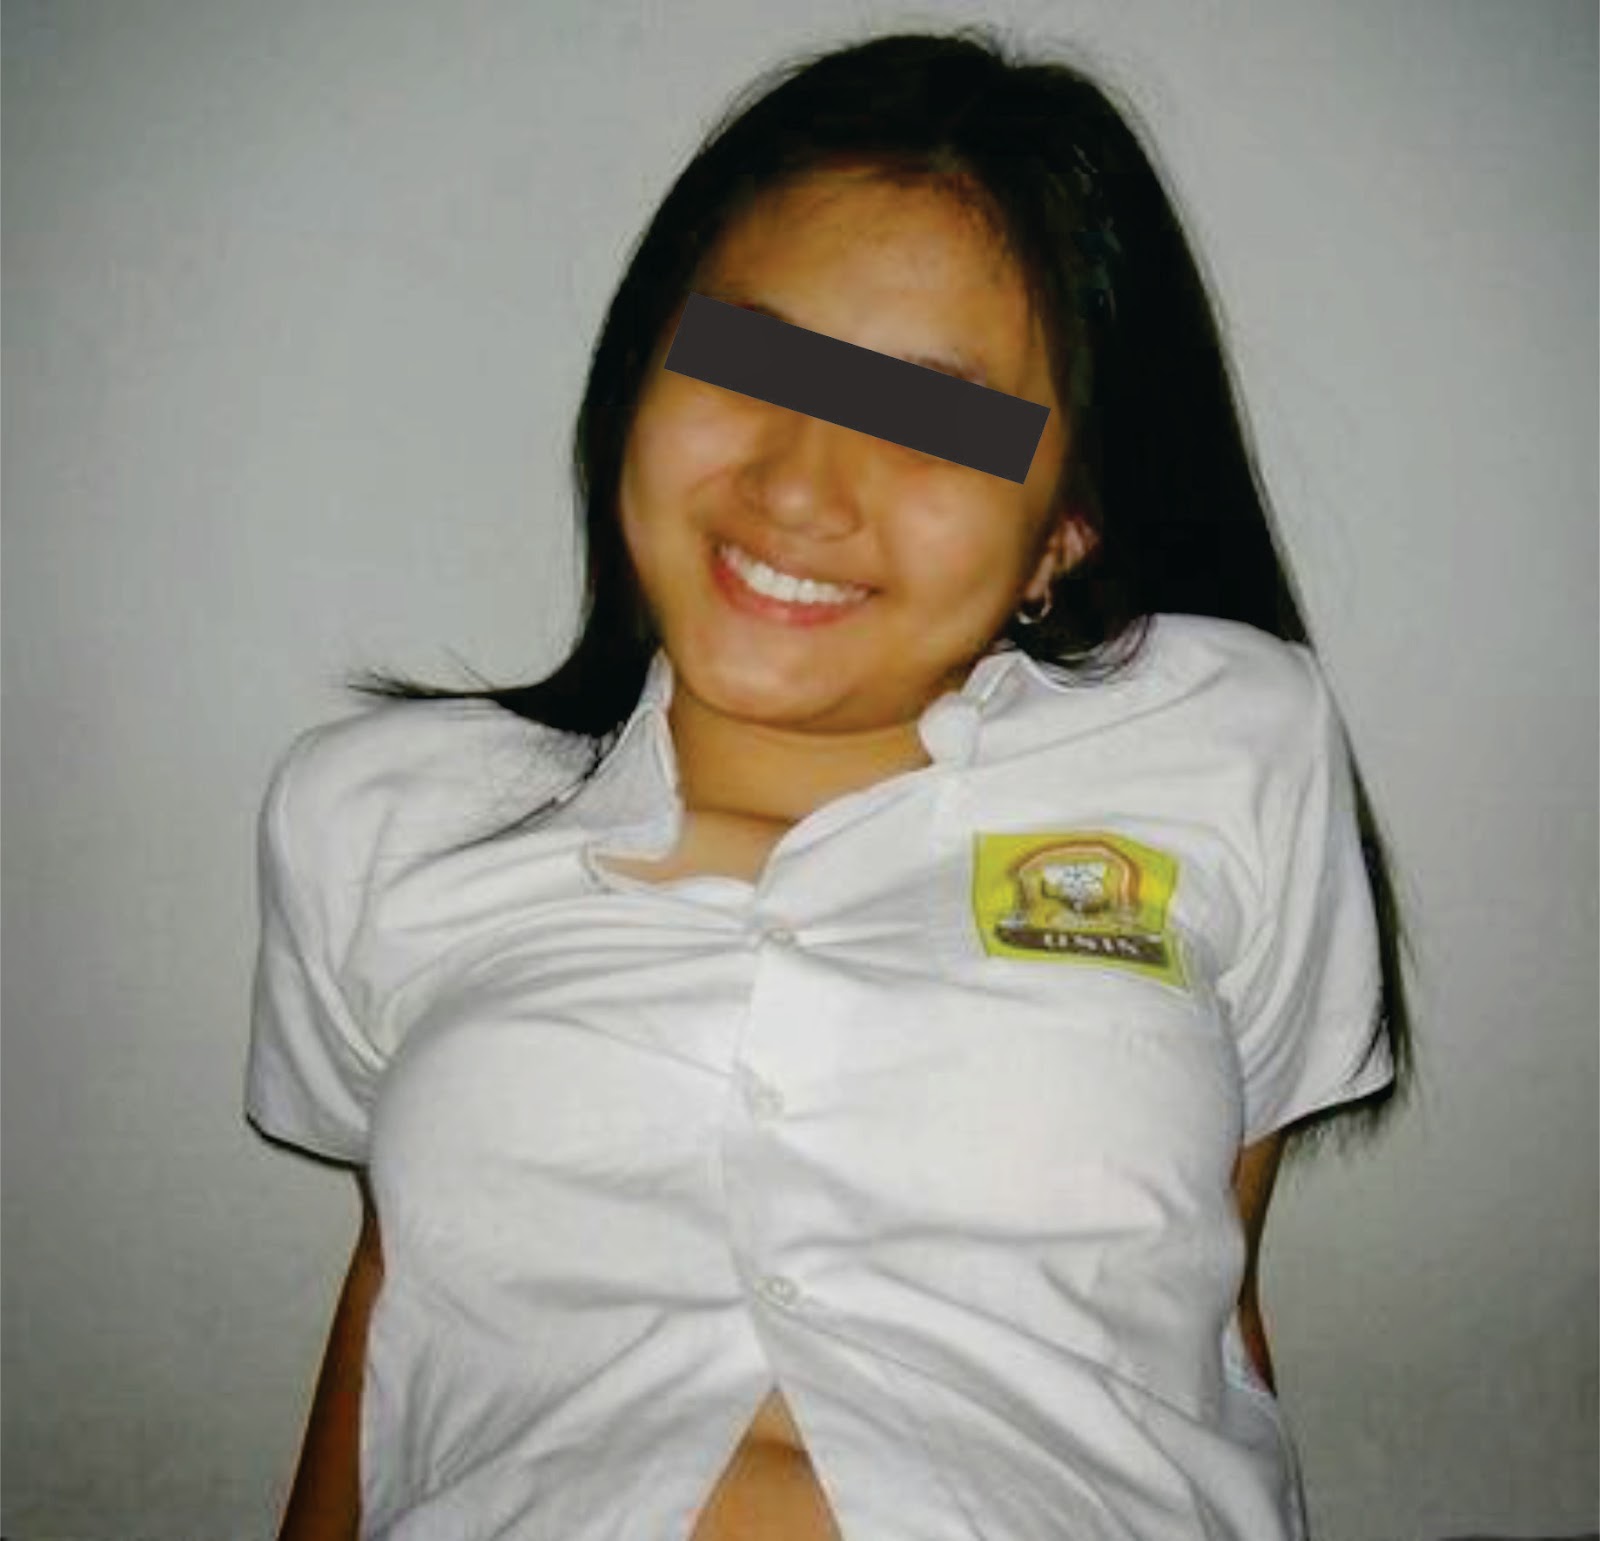 Indonesian amateur girl nudes fan compilations